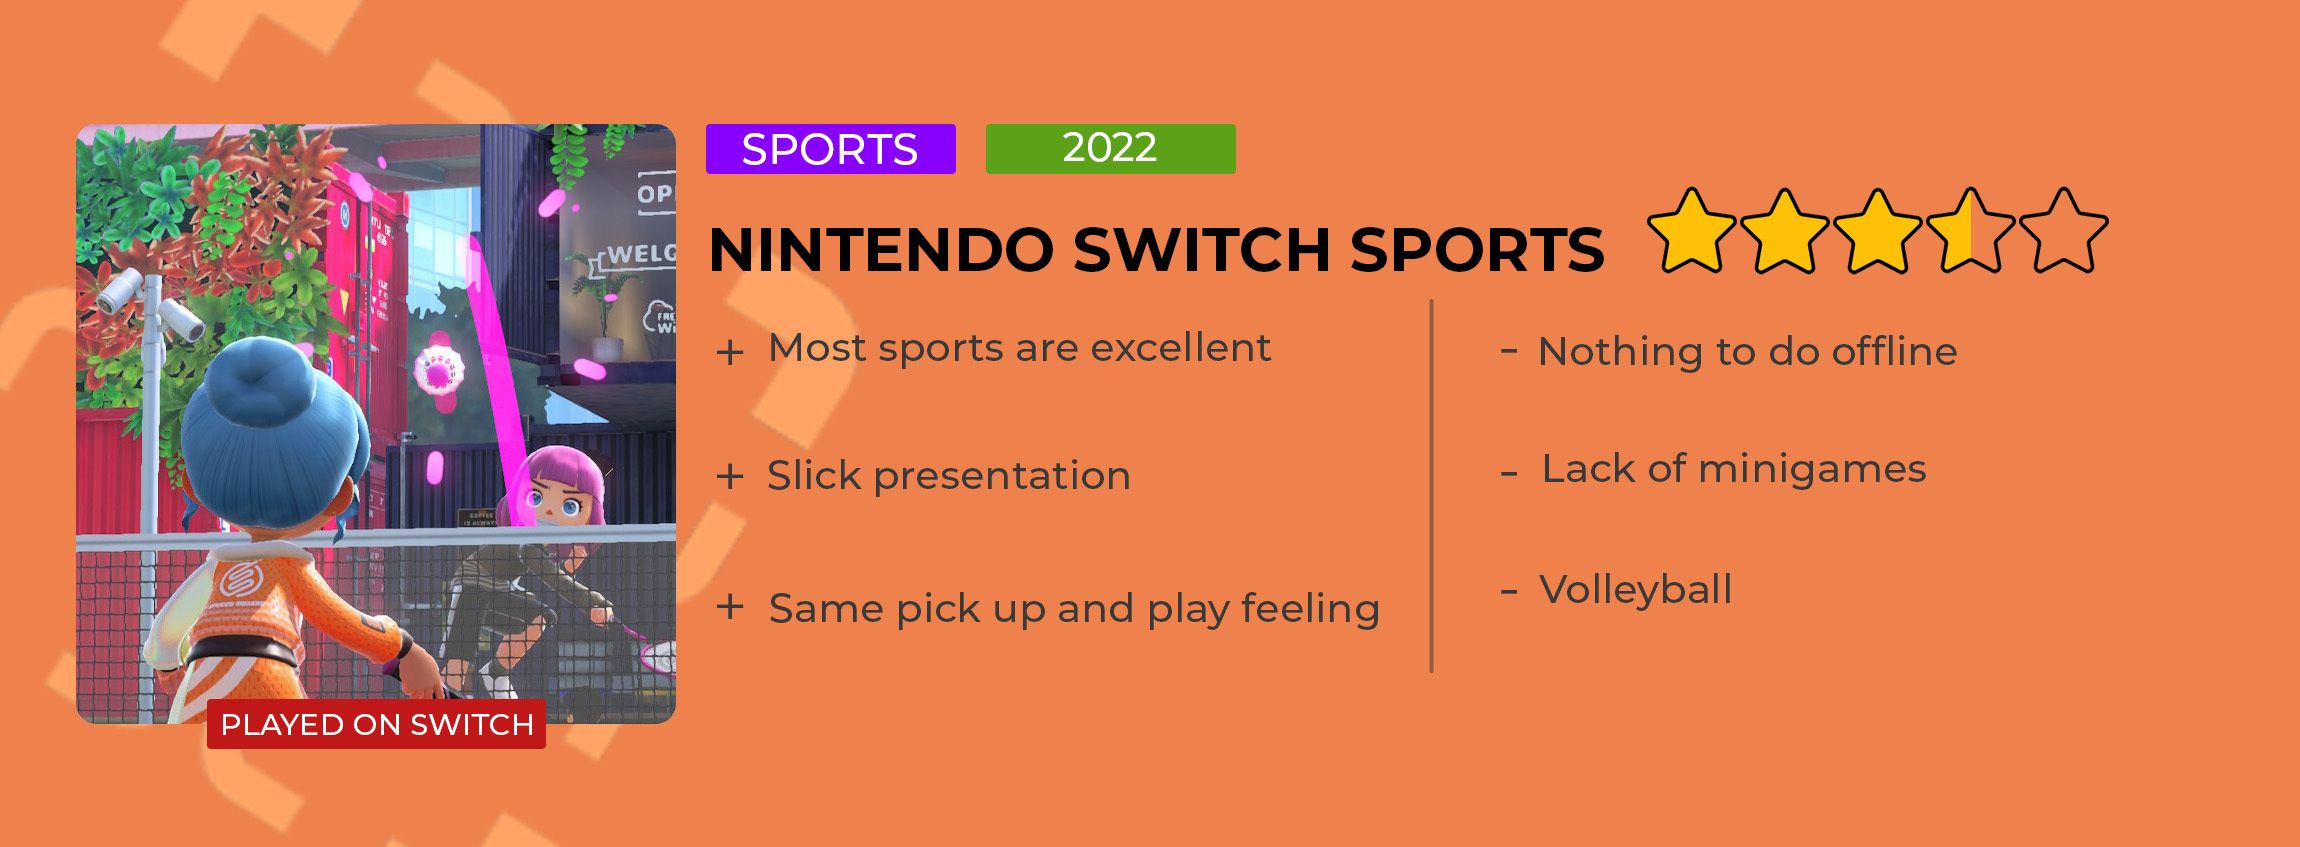 Nintendo Switch Sports Review Card